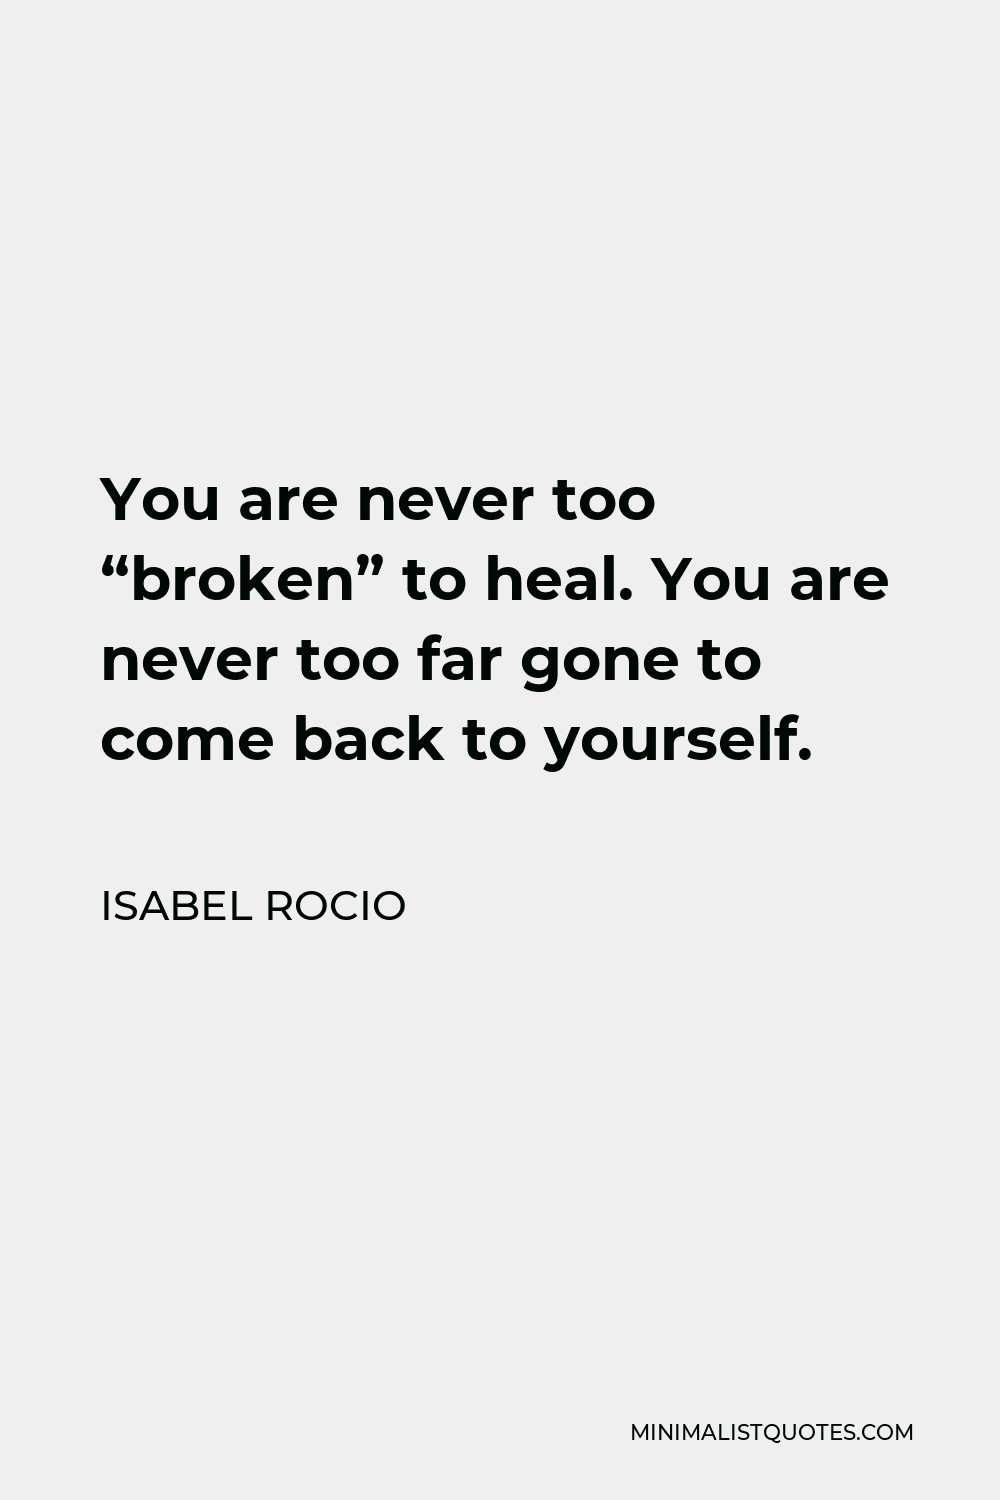 Isabel Rocio Quote - You are never too “broken” to heal. You are never too far gone to come back to yourself.